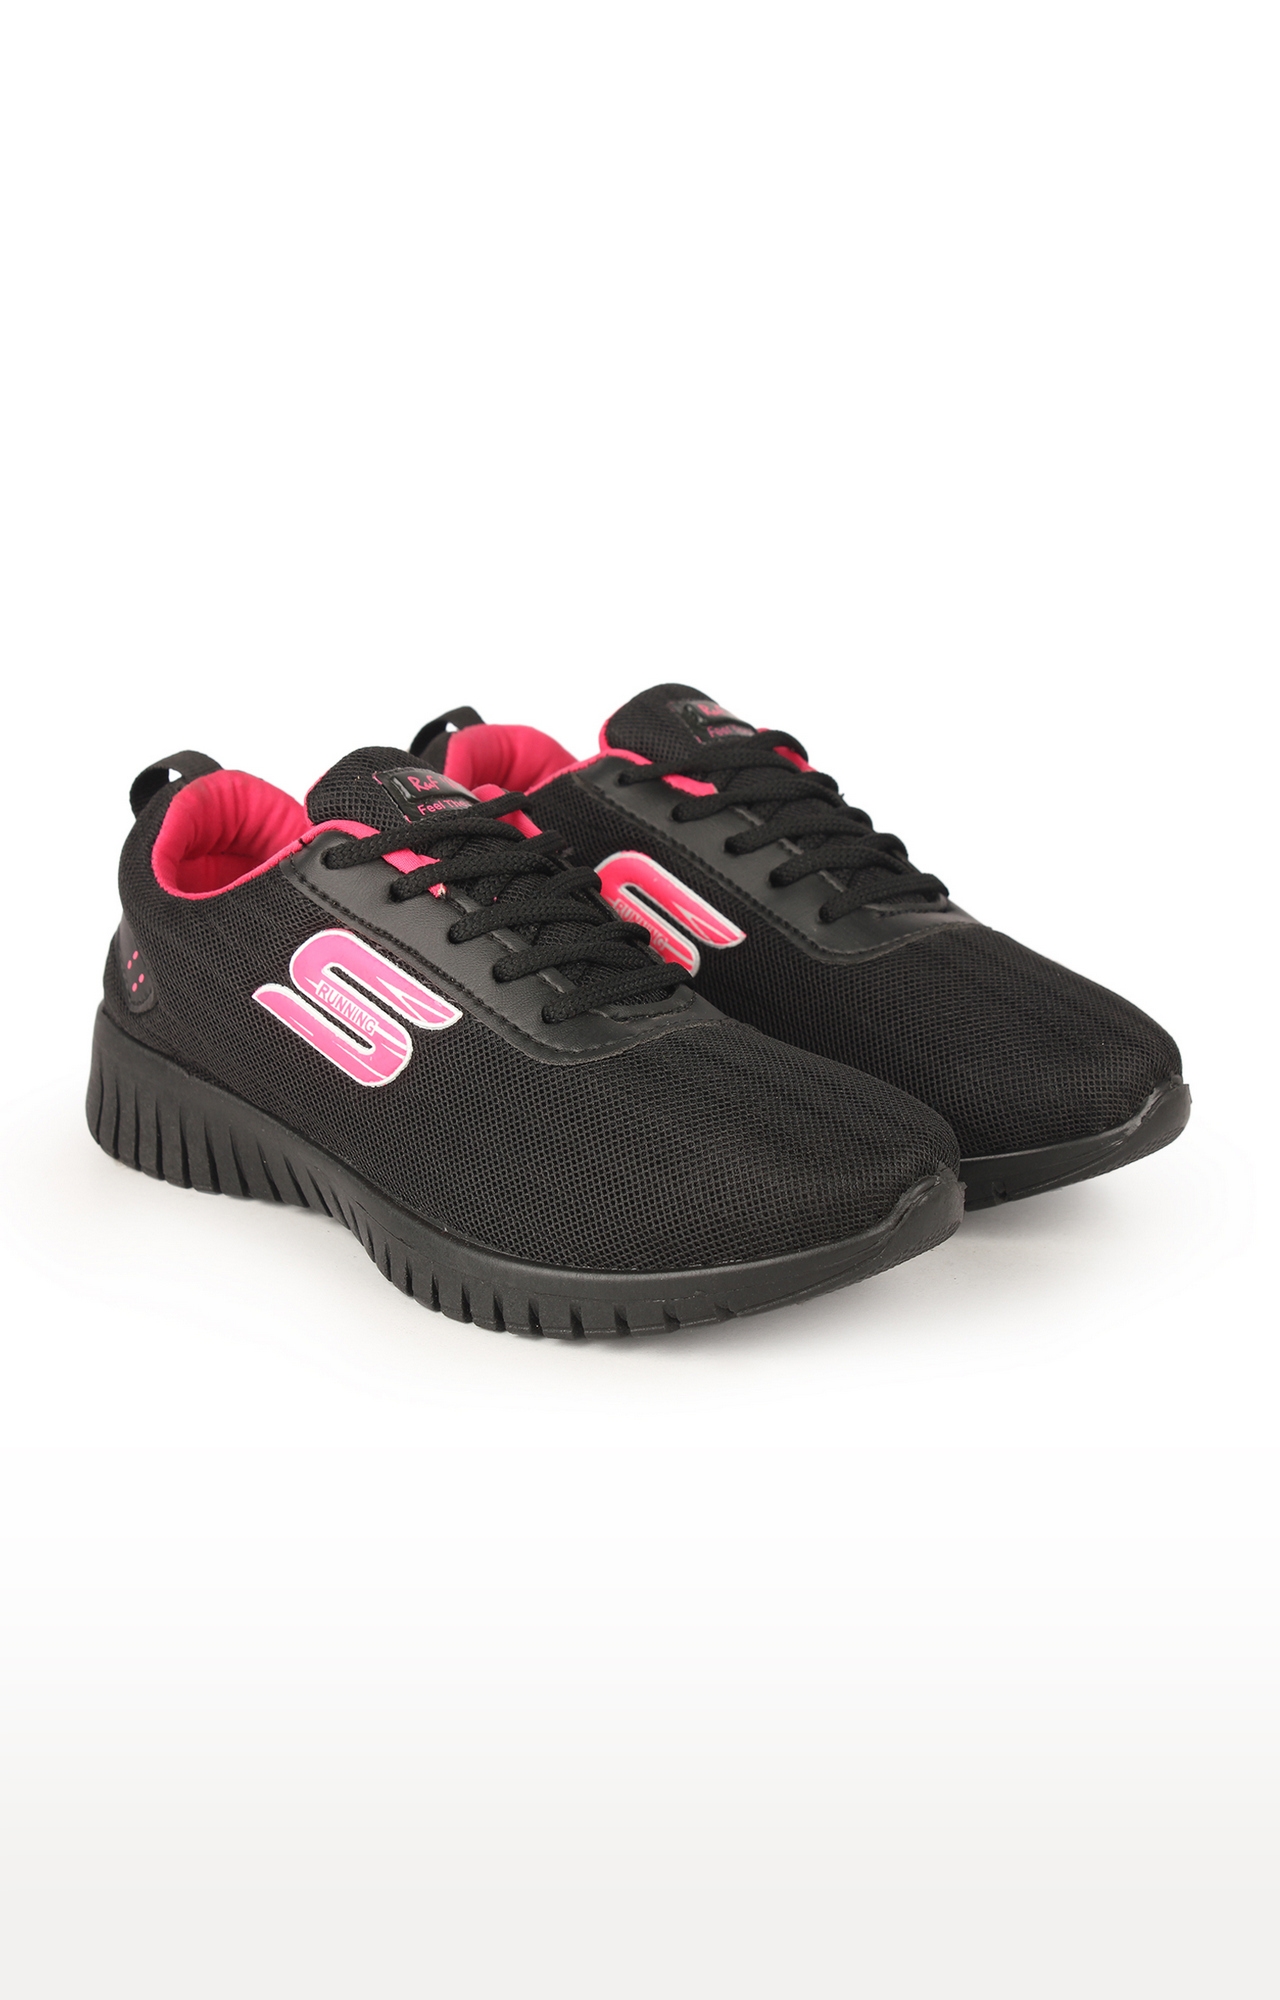 RNT | RNT Sketch 01 Black and Pink Shoes for Women